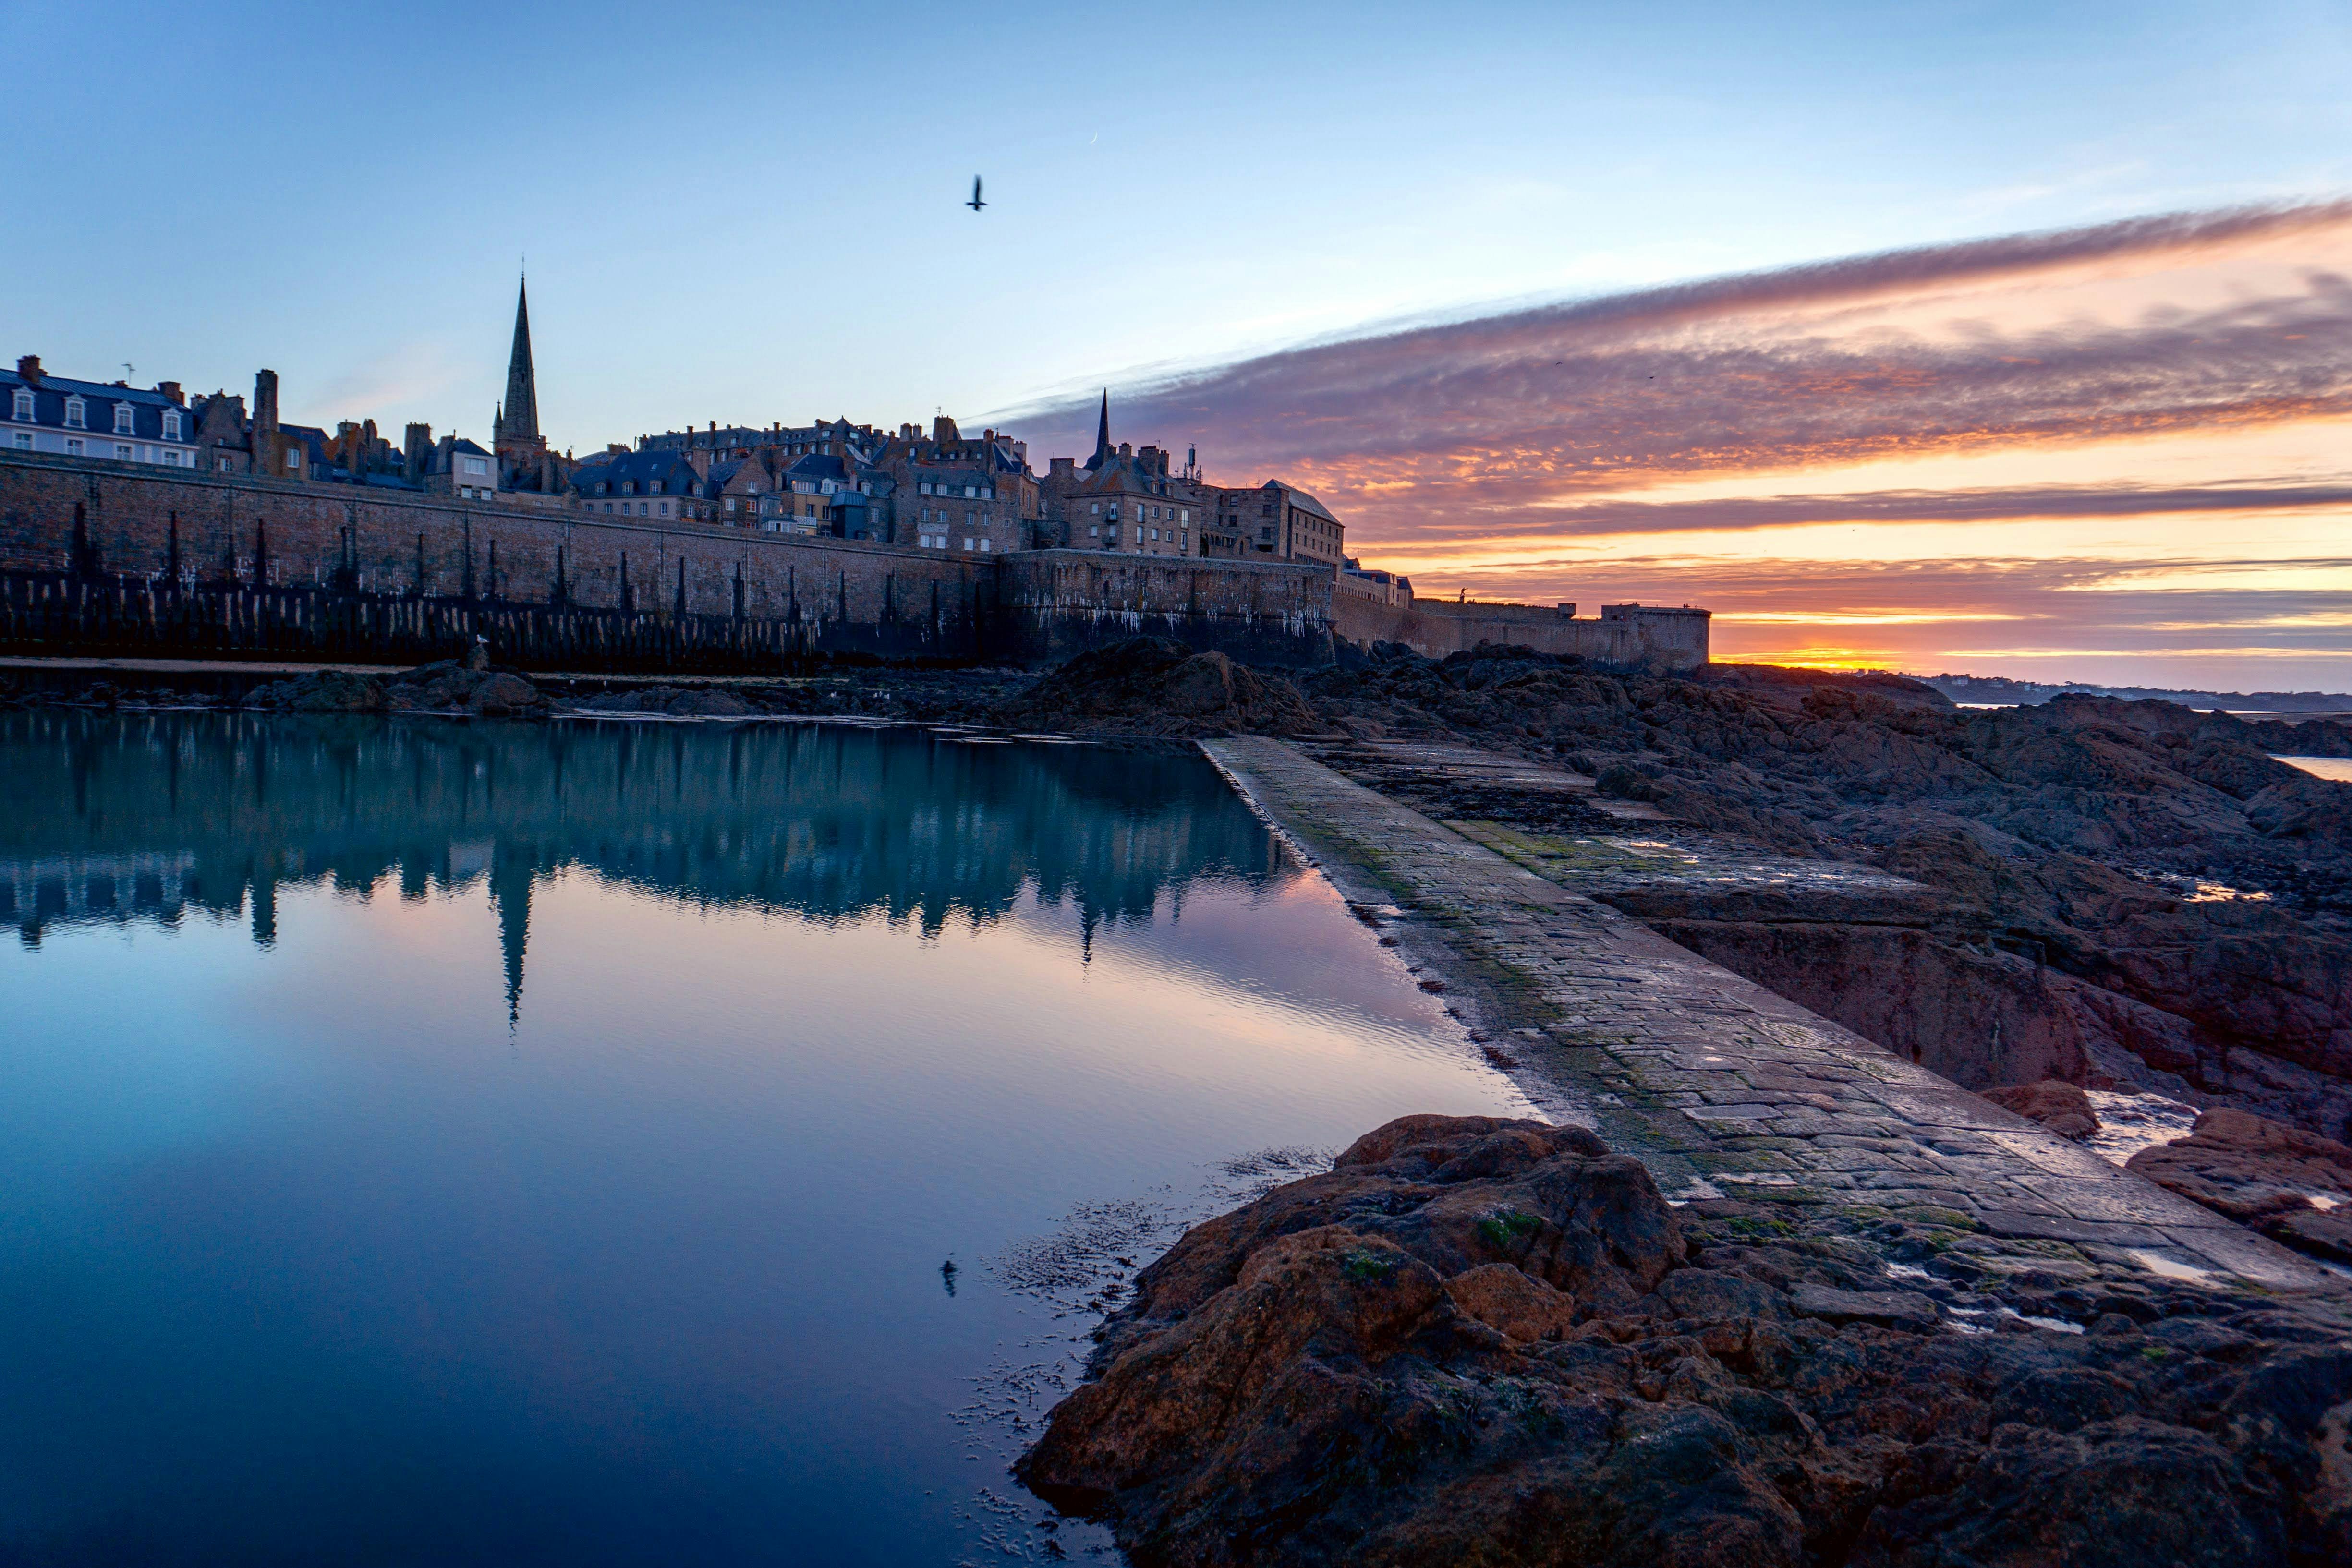 Saint-Malo in winter.  we see the sea and intramural, the Corsair coast.  this photo was taken in the morning.  we see a seagull and the reflection